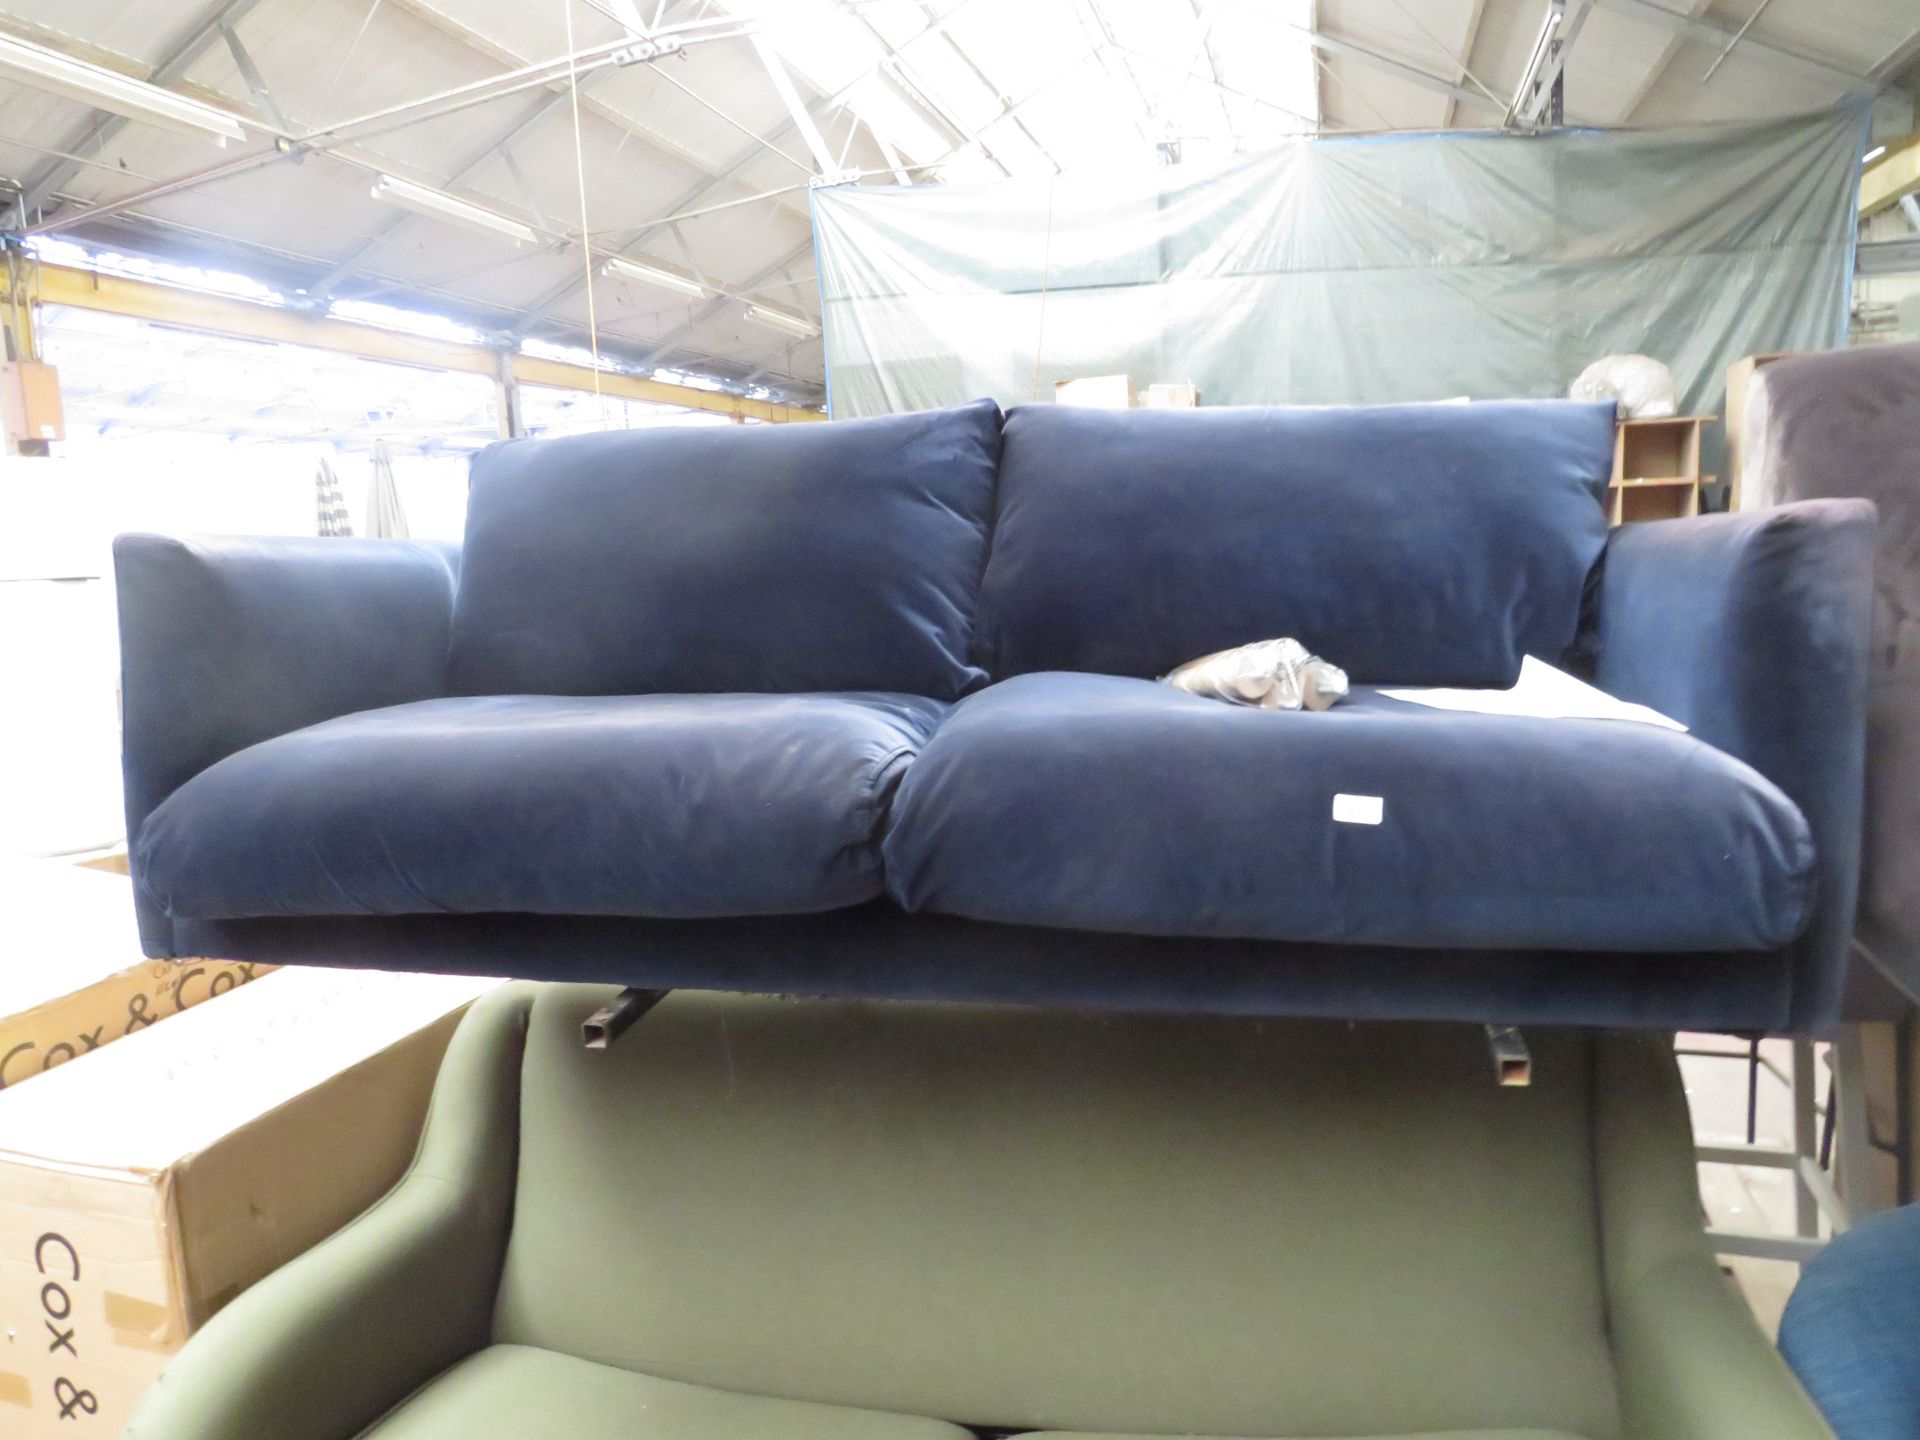 | 1X | SWOON EDITIONS 3 SEATER SOFA BLUE VELVET SOFA | HAS IMPERFECTIONS SUCH AS ON THE MATERIAL,